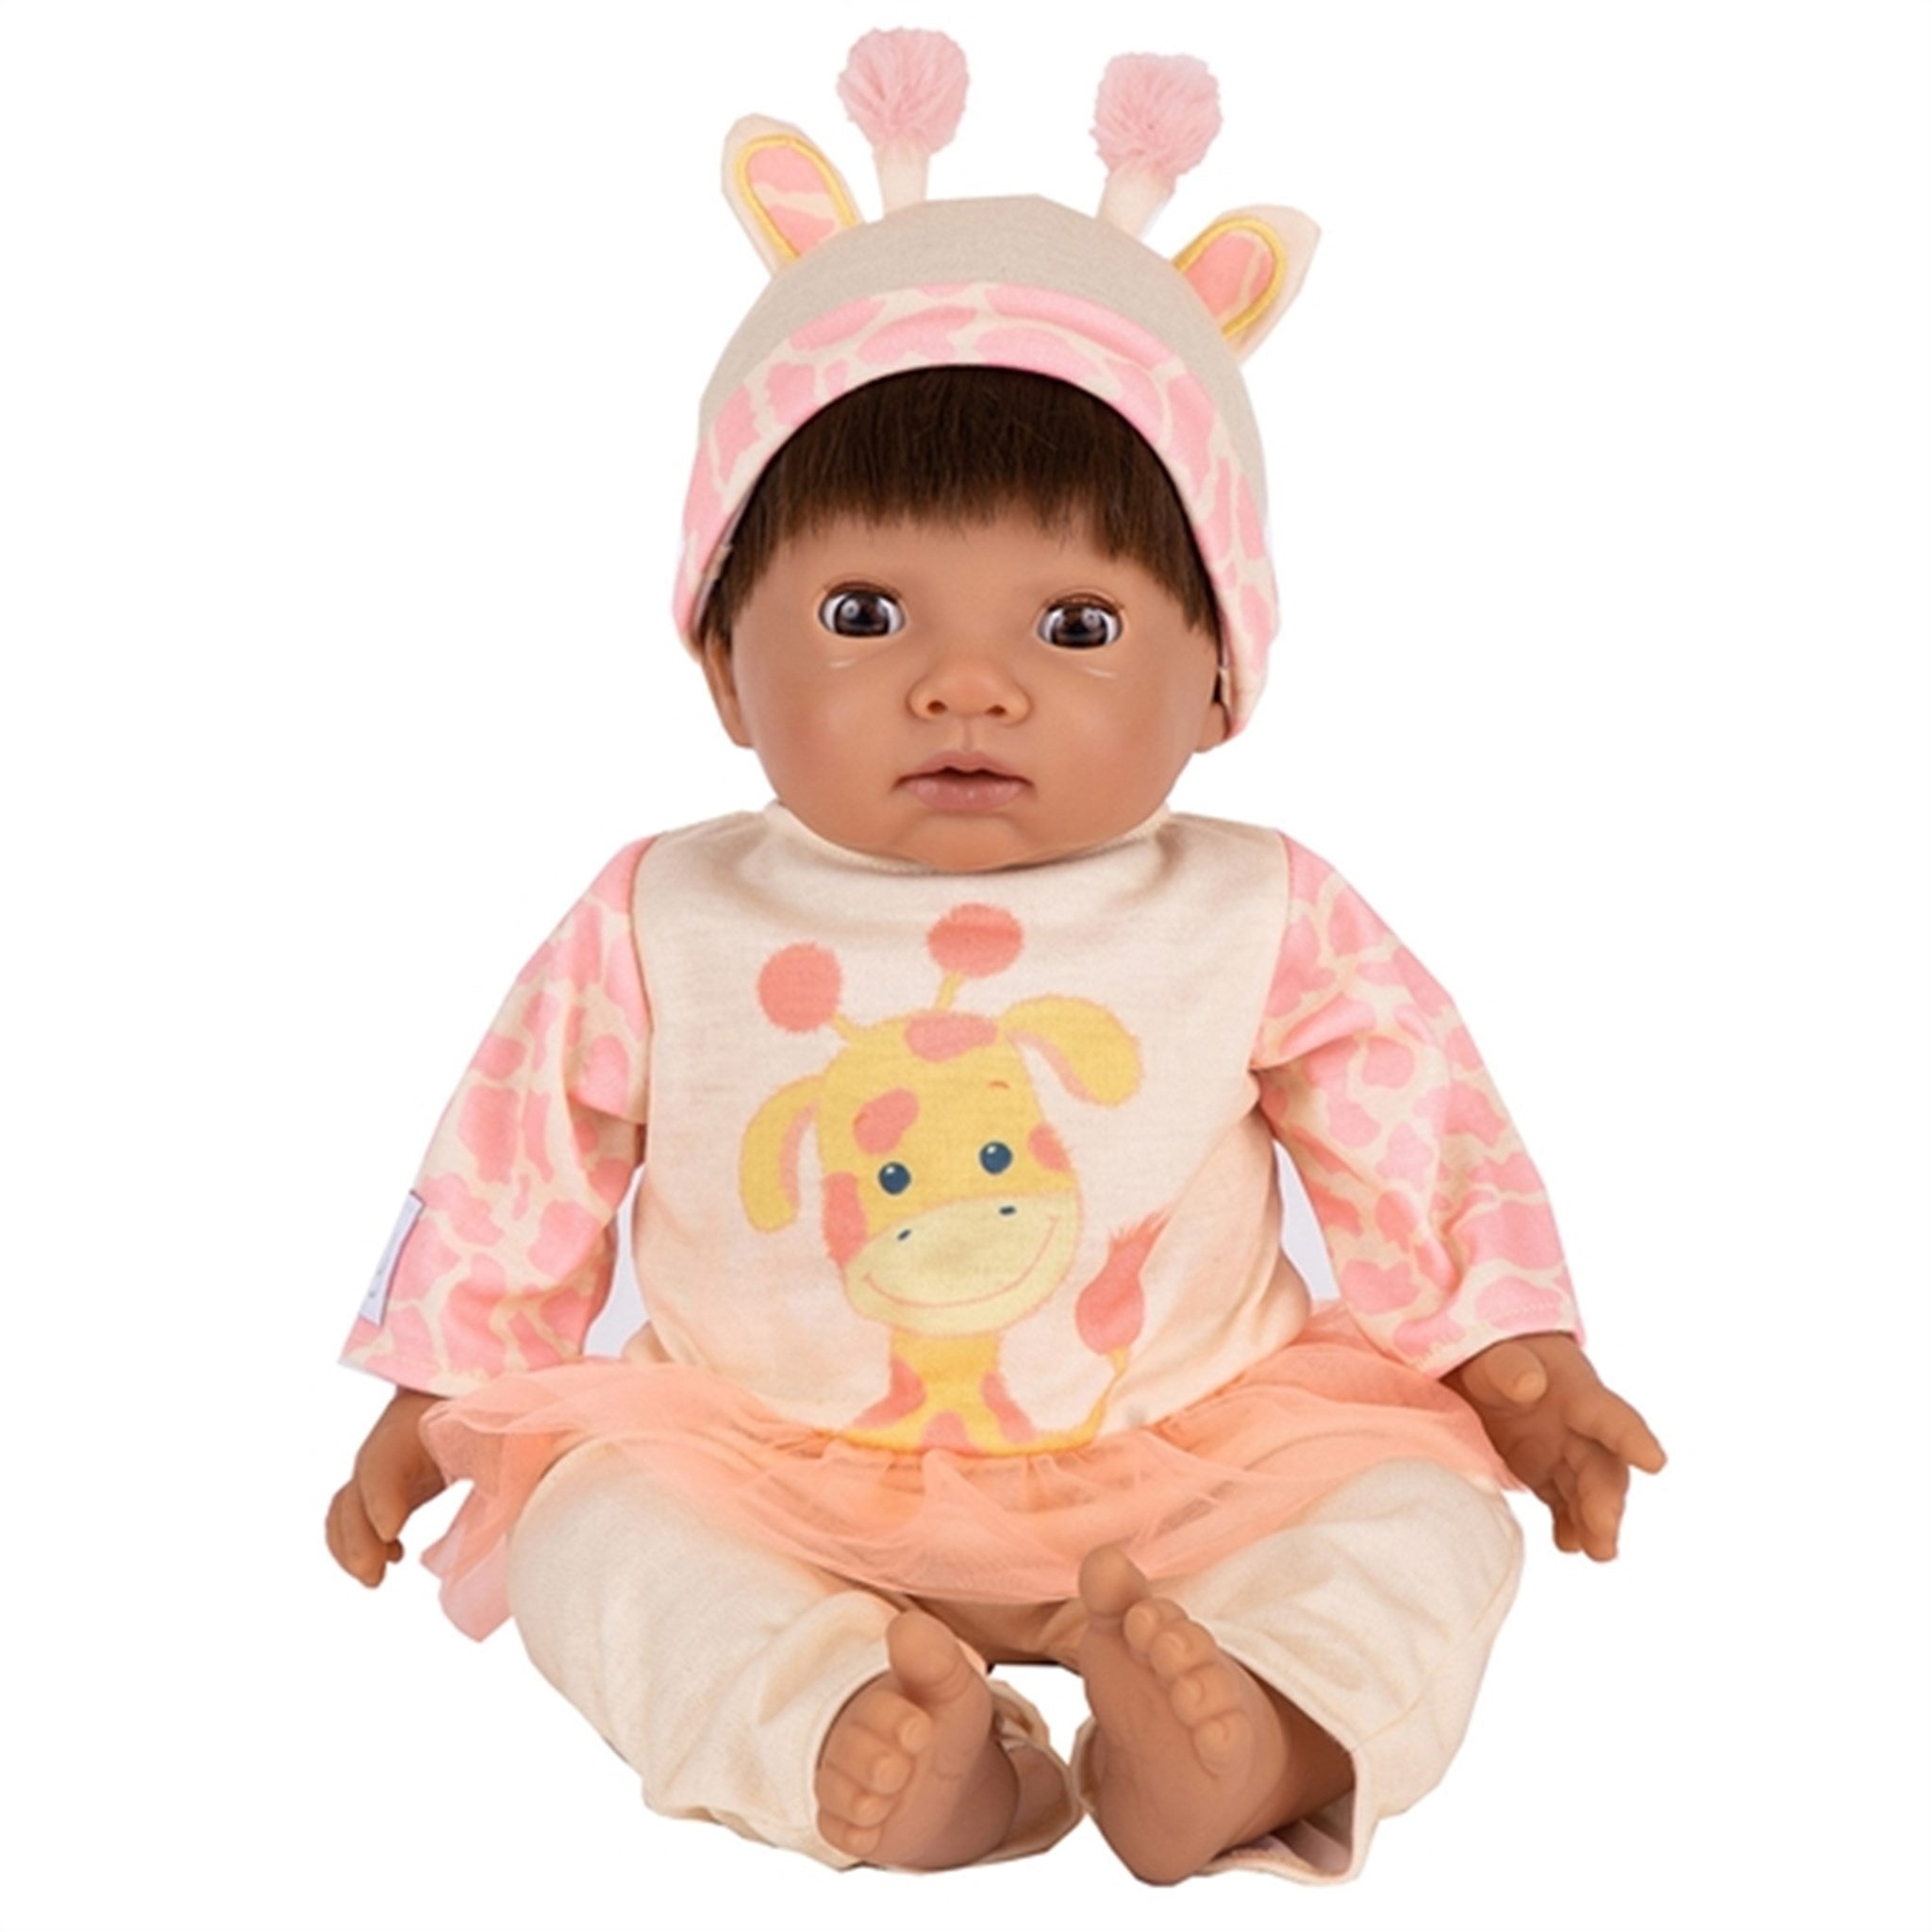 Tiny Treasure Brown Haired Doll Giraffe Outfit 4